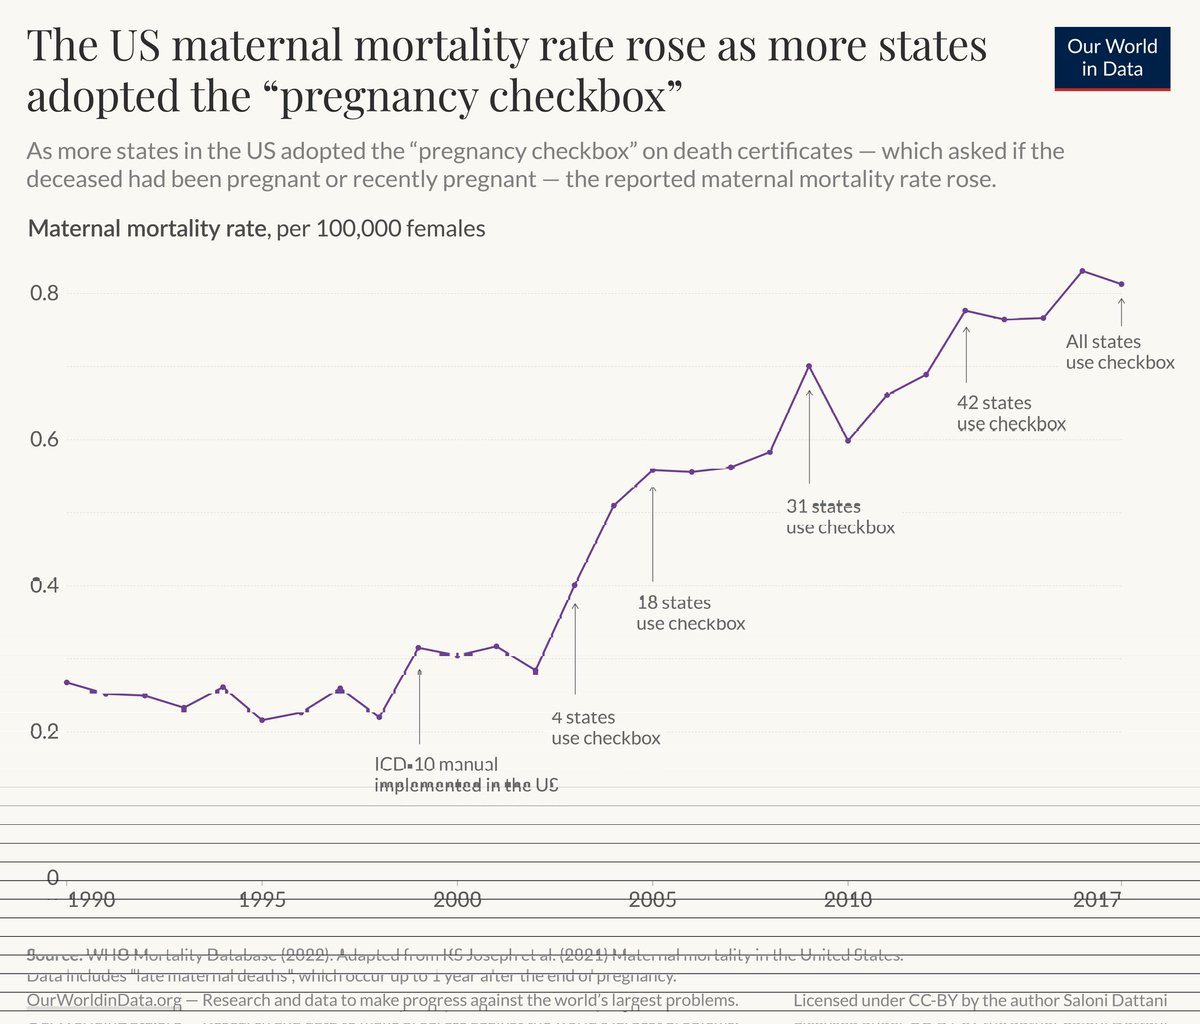 New article by me: The rise in reported maternal mortality rates in the US is largely due to a change in measurement. ourworldindata.org/rise-us-matern… The change was adopted by different states at different times, resulting in what appeared to be a gradual rise in maternal mortality.